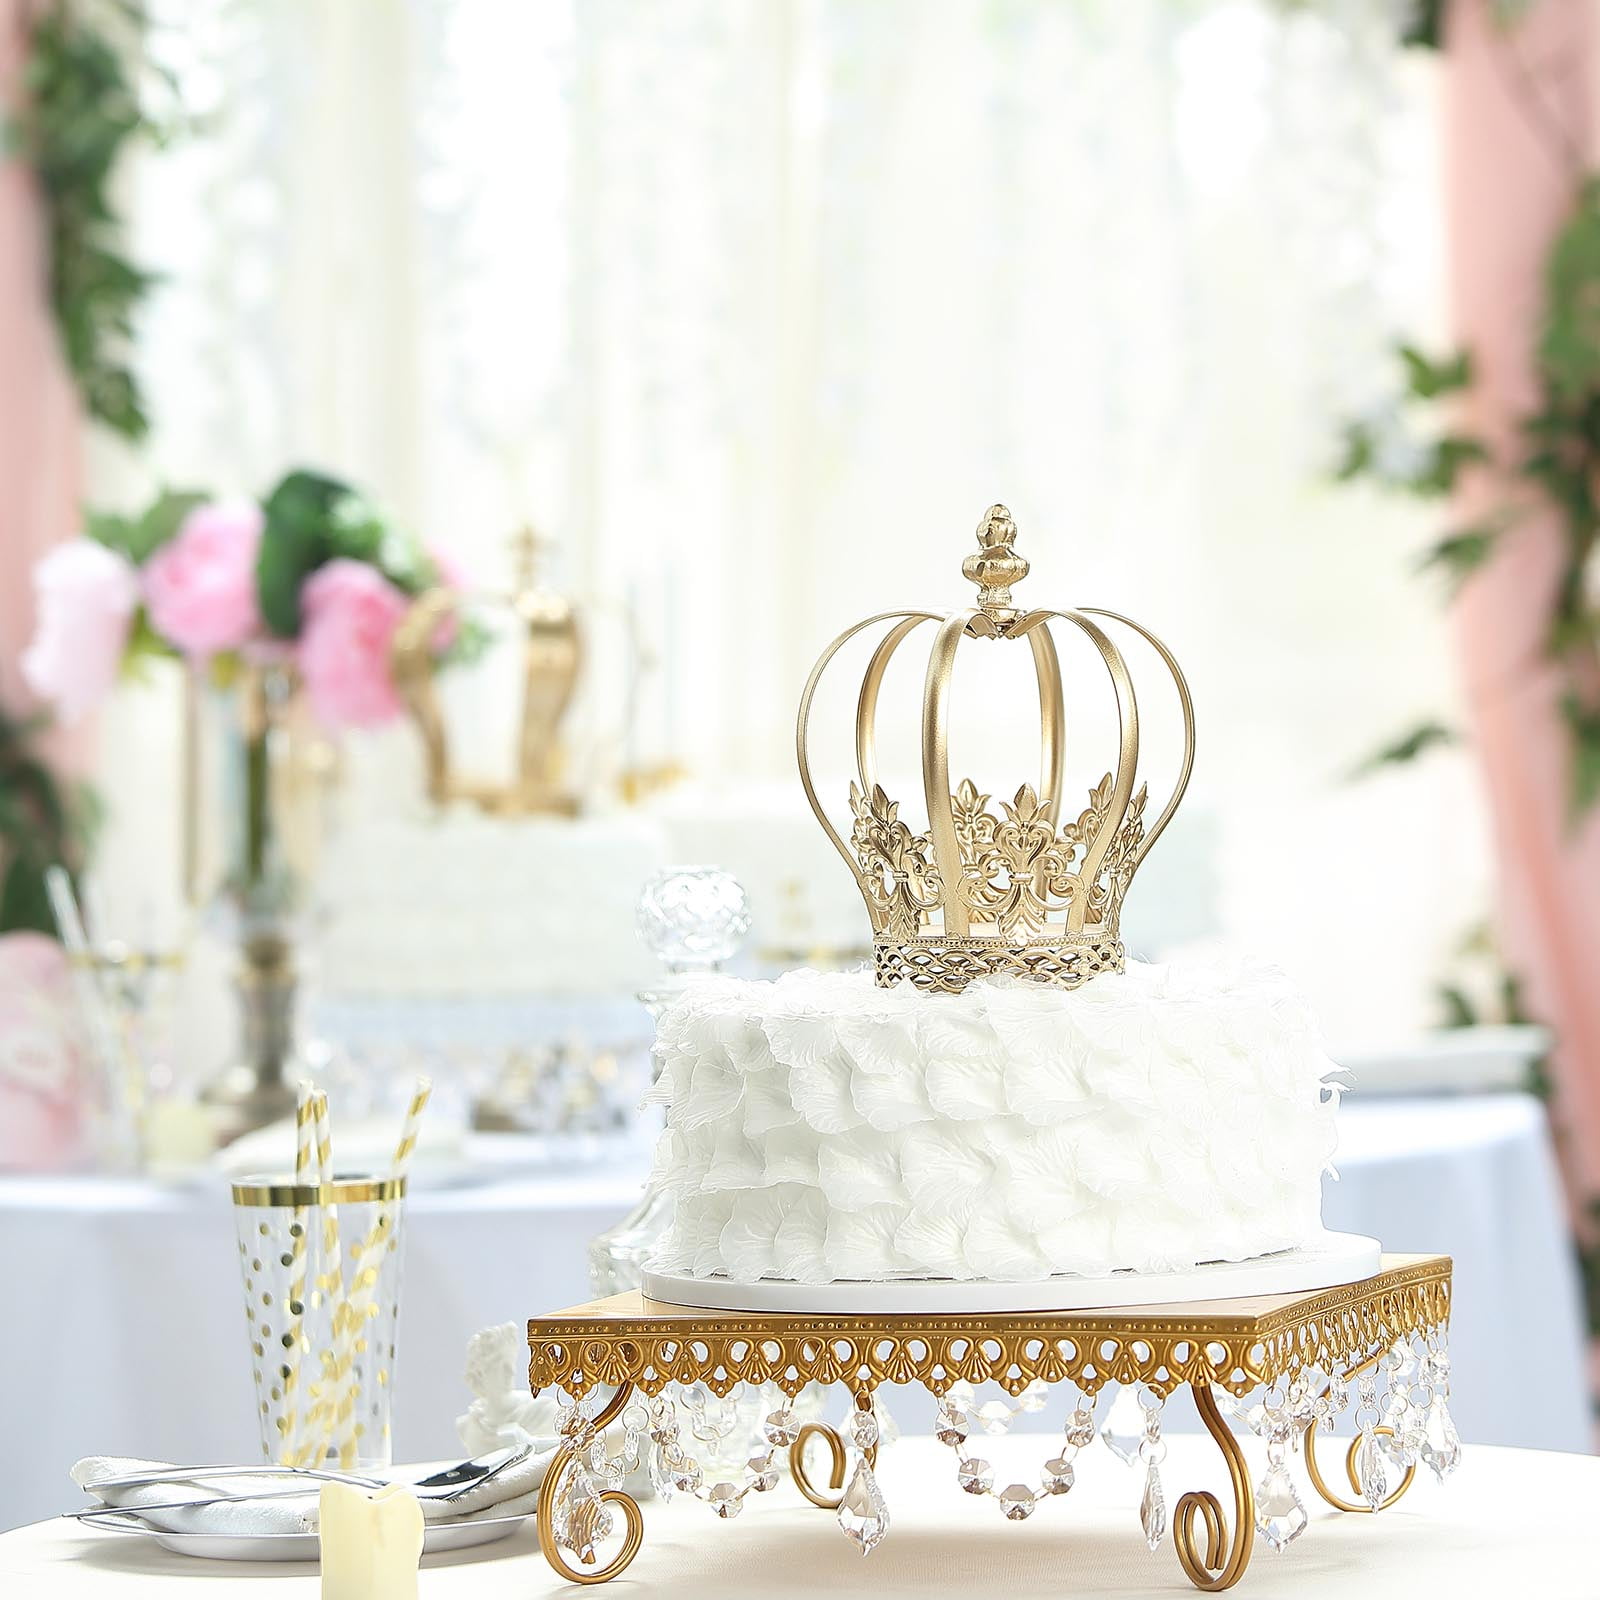 BalsaCircle 4-Inch wide Gold Metal Crown Cake Topper - Princess Knight  Prince Kids Birthday Party Centerpiece Decorations